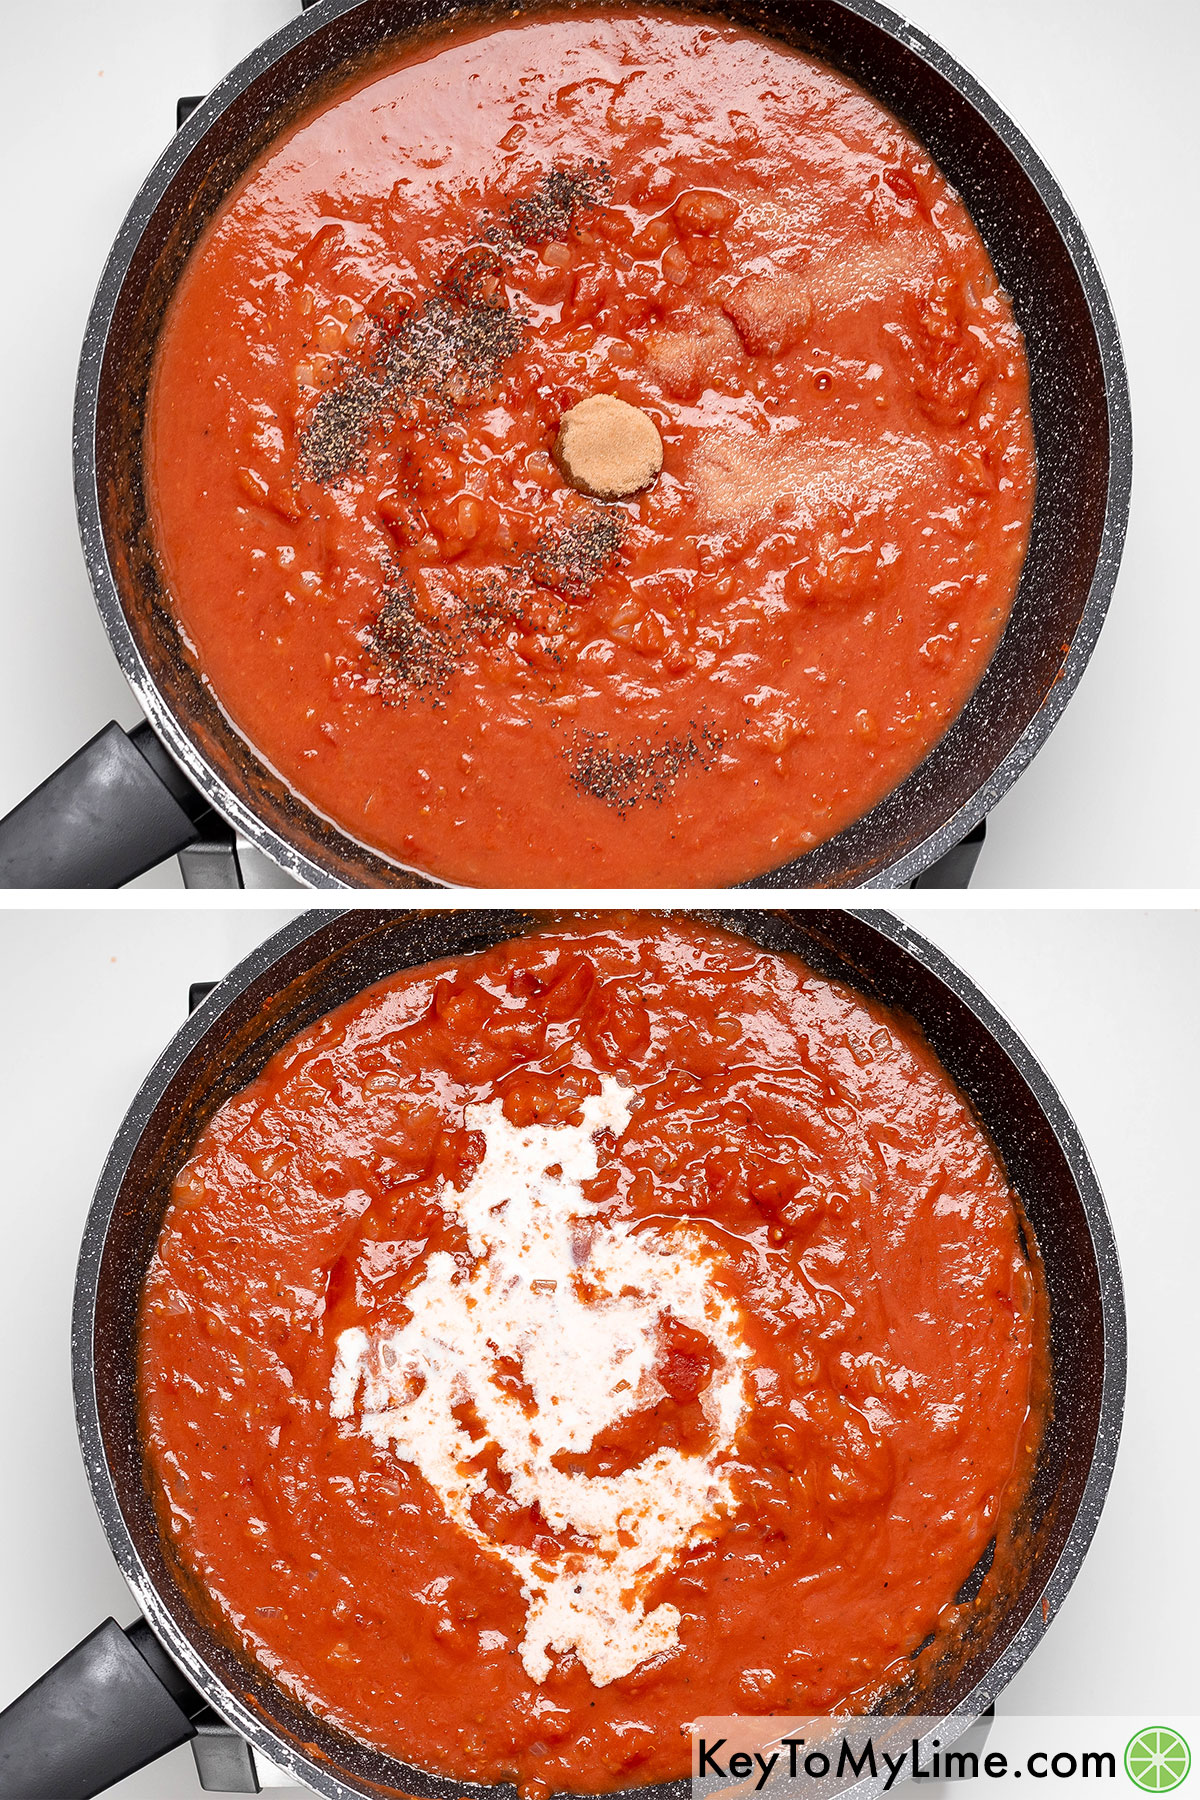 Adding sugar, salt, and pepper to the tomato mixture and simmering before adding the cream.